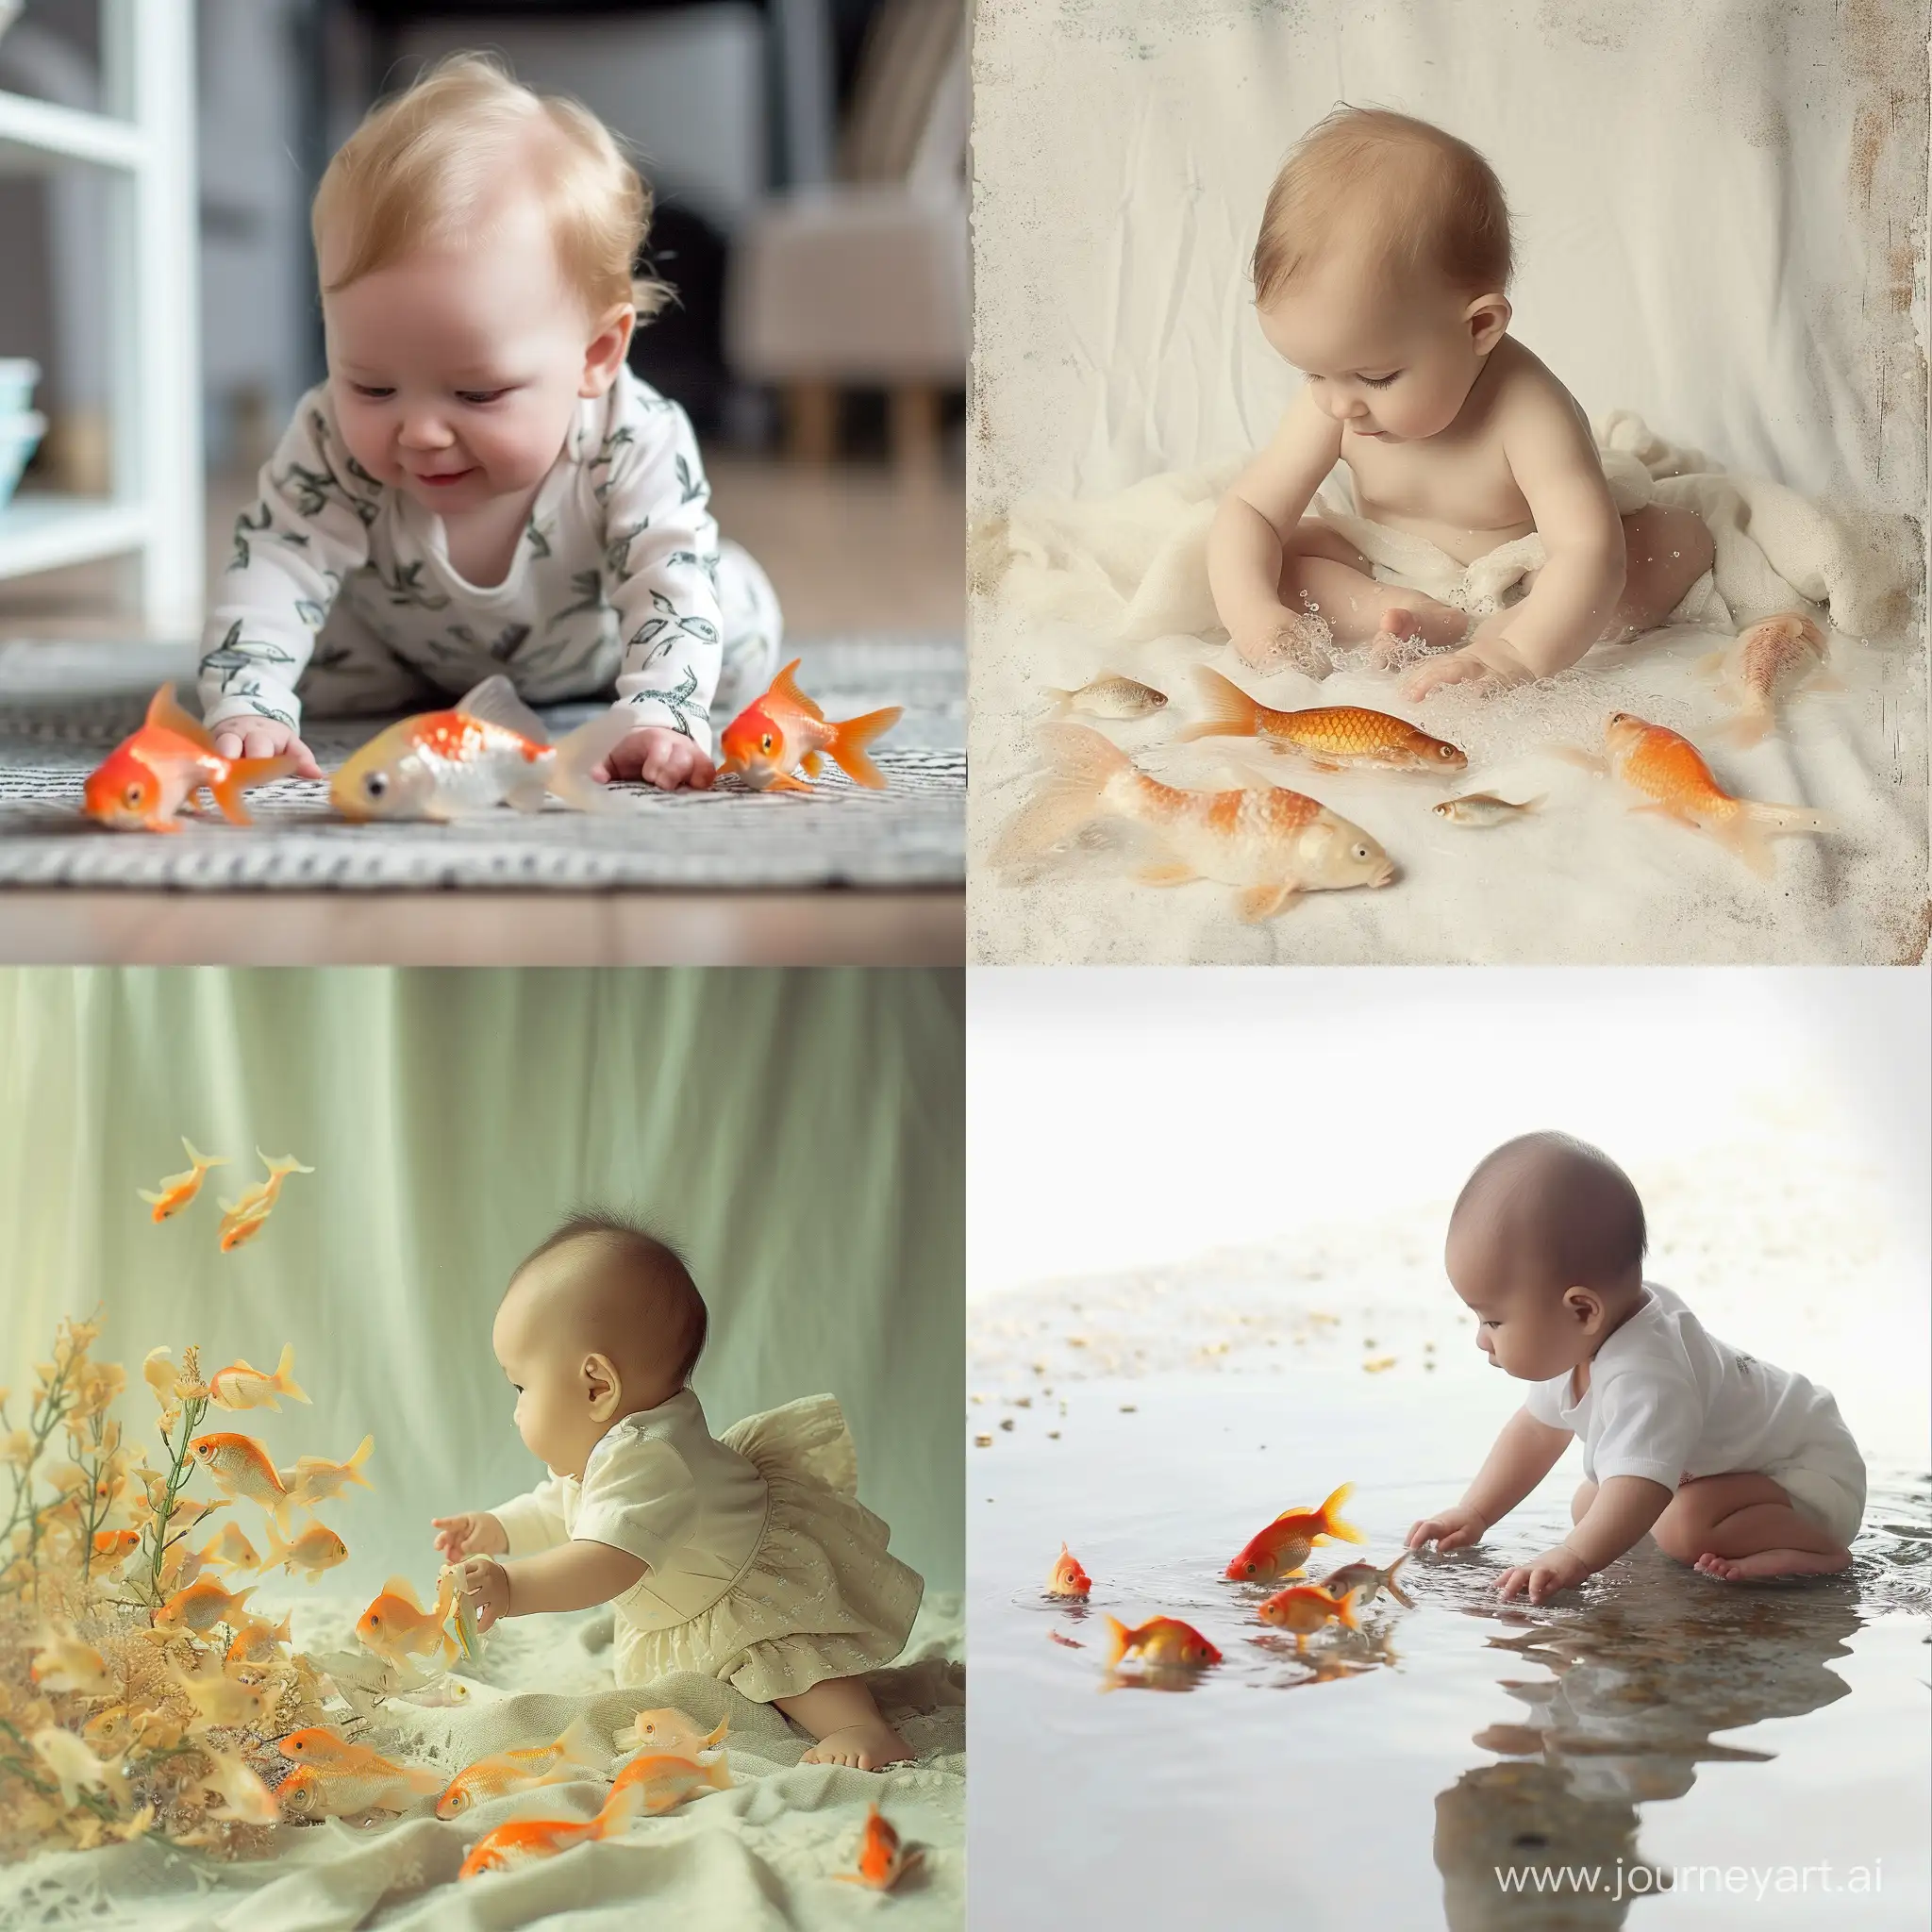 Joyful-Baby-Playing-with-Colorful-Fish